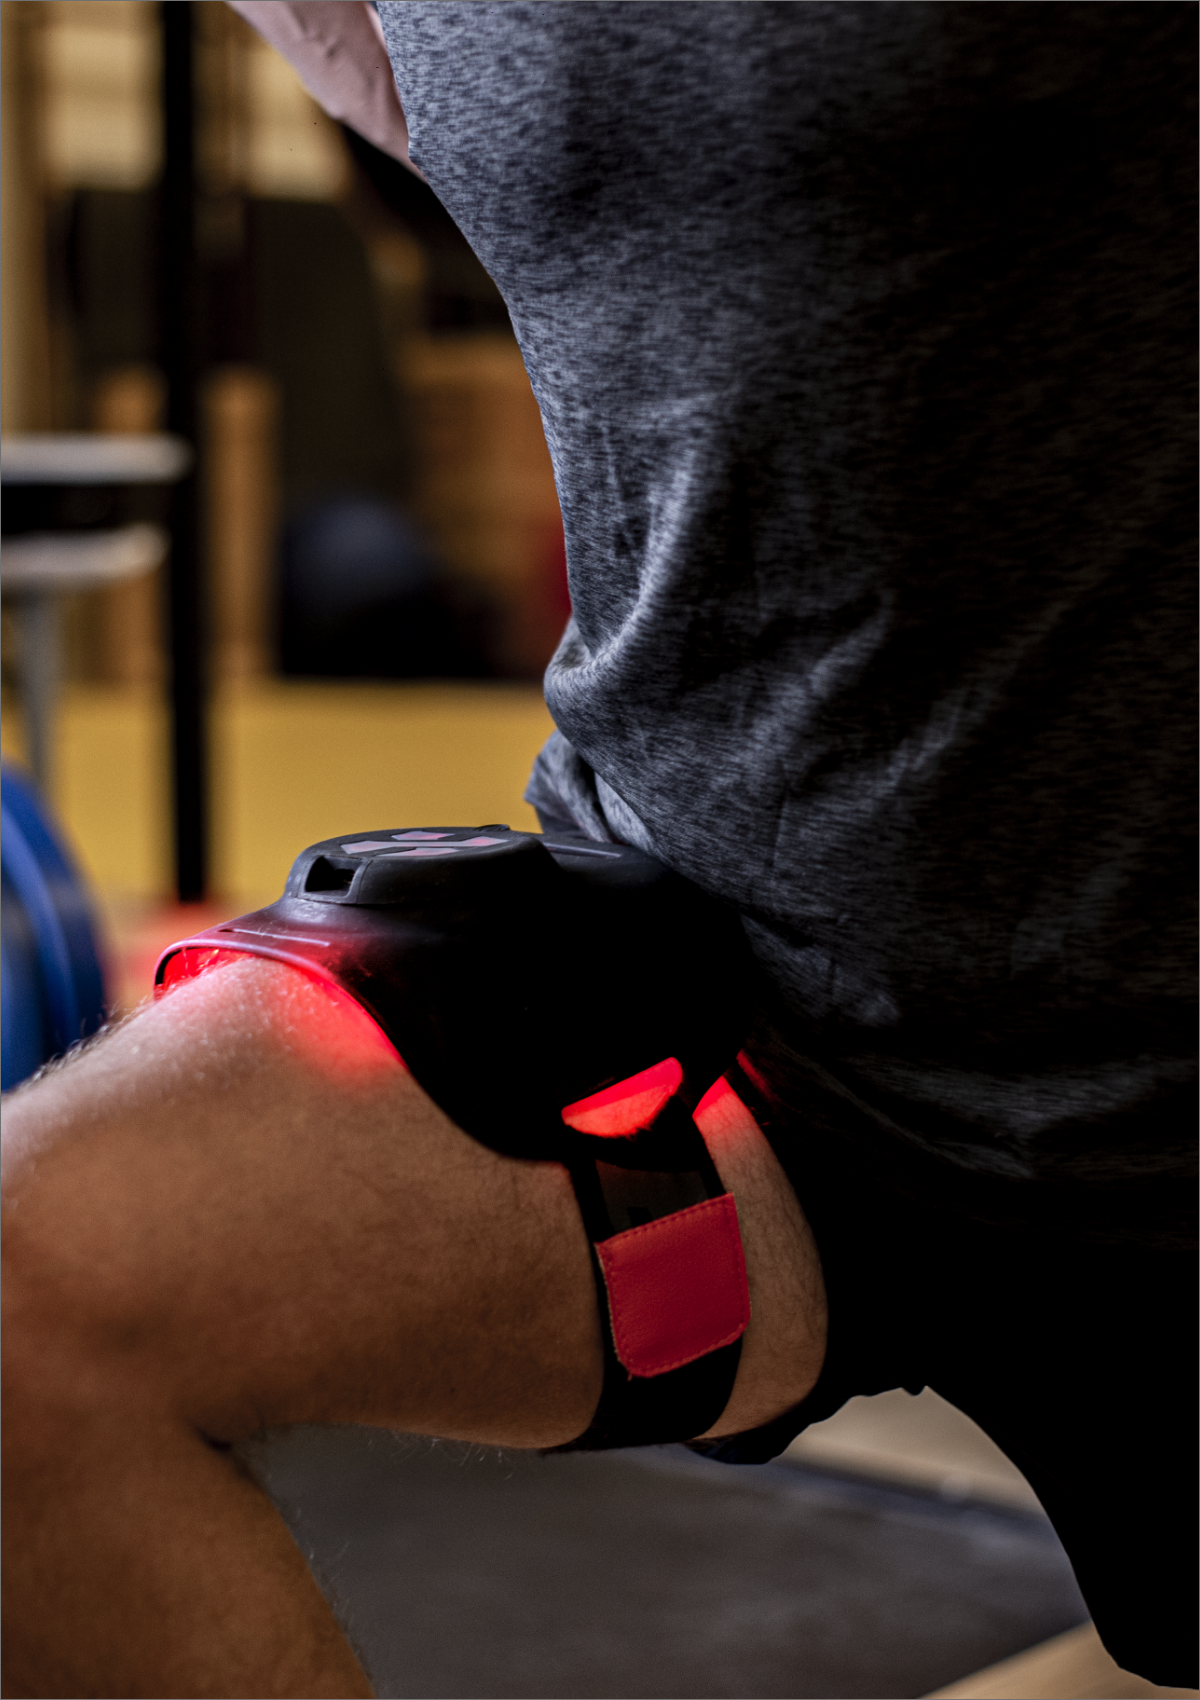 Lumaflex | Body Pro | Portable light therapy for on-the-go use | Accelerate healing